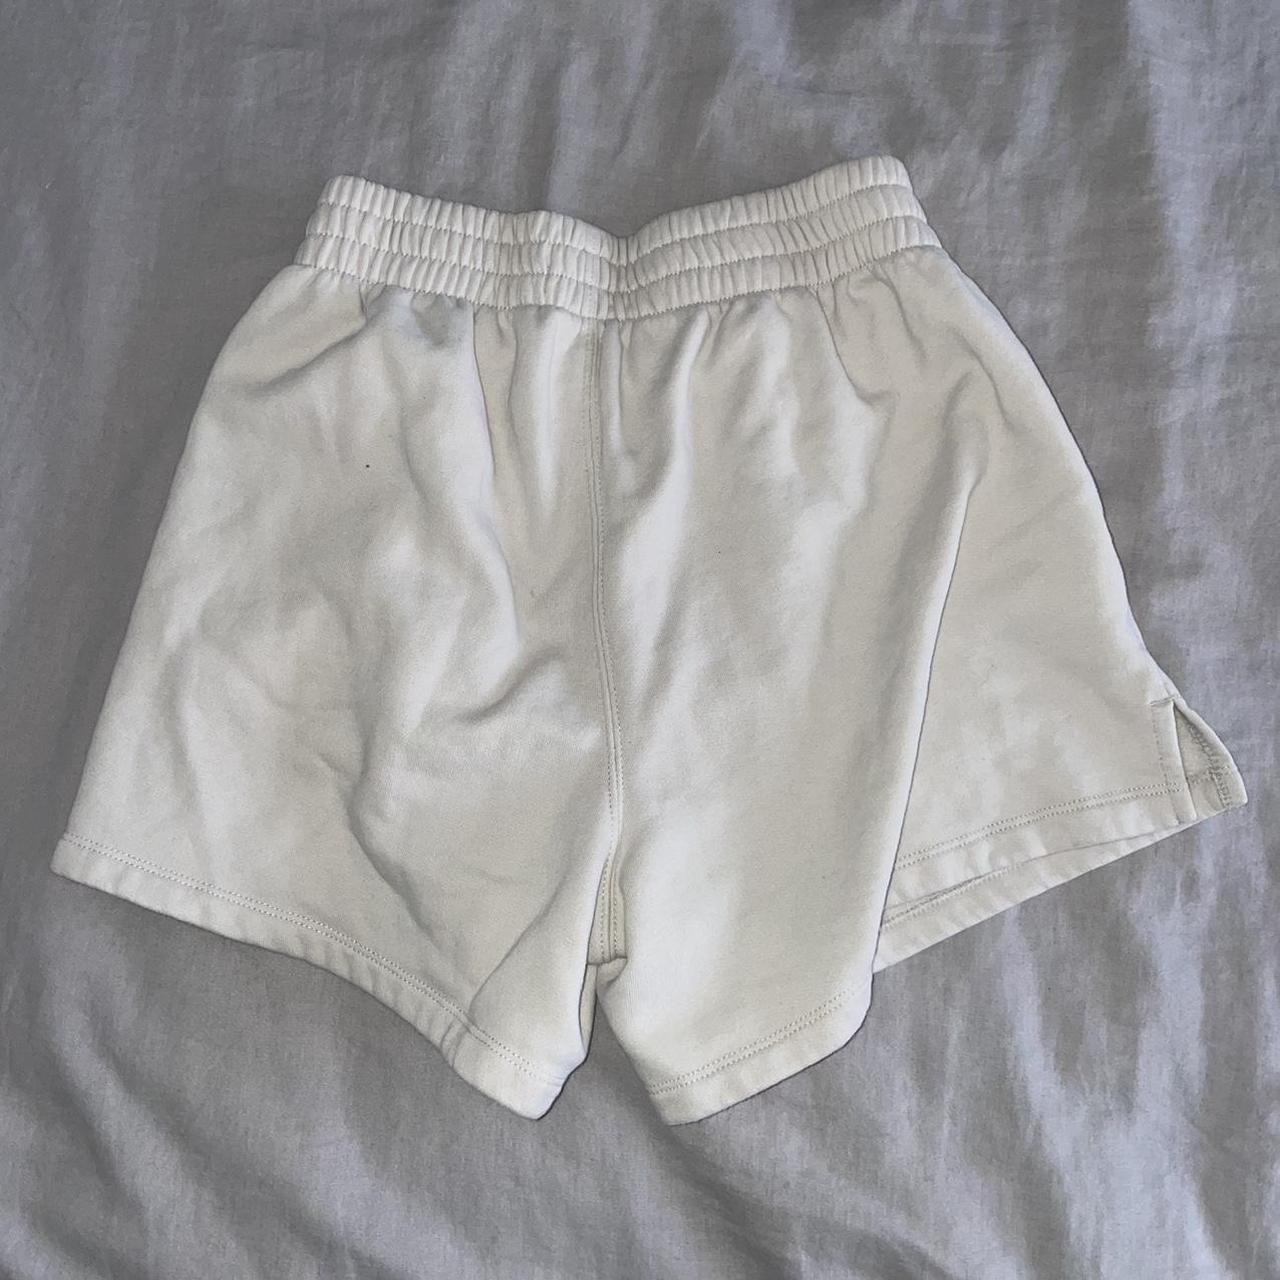 Abercrombie & Fitch Women's Cream Shorts (2)